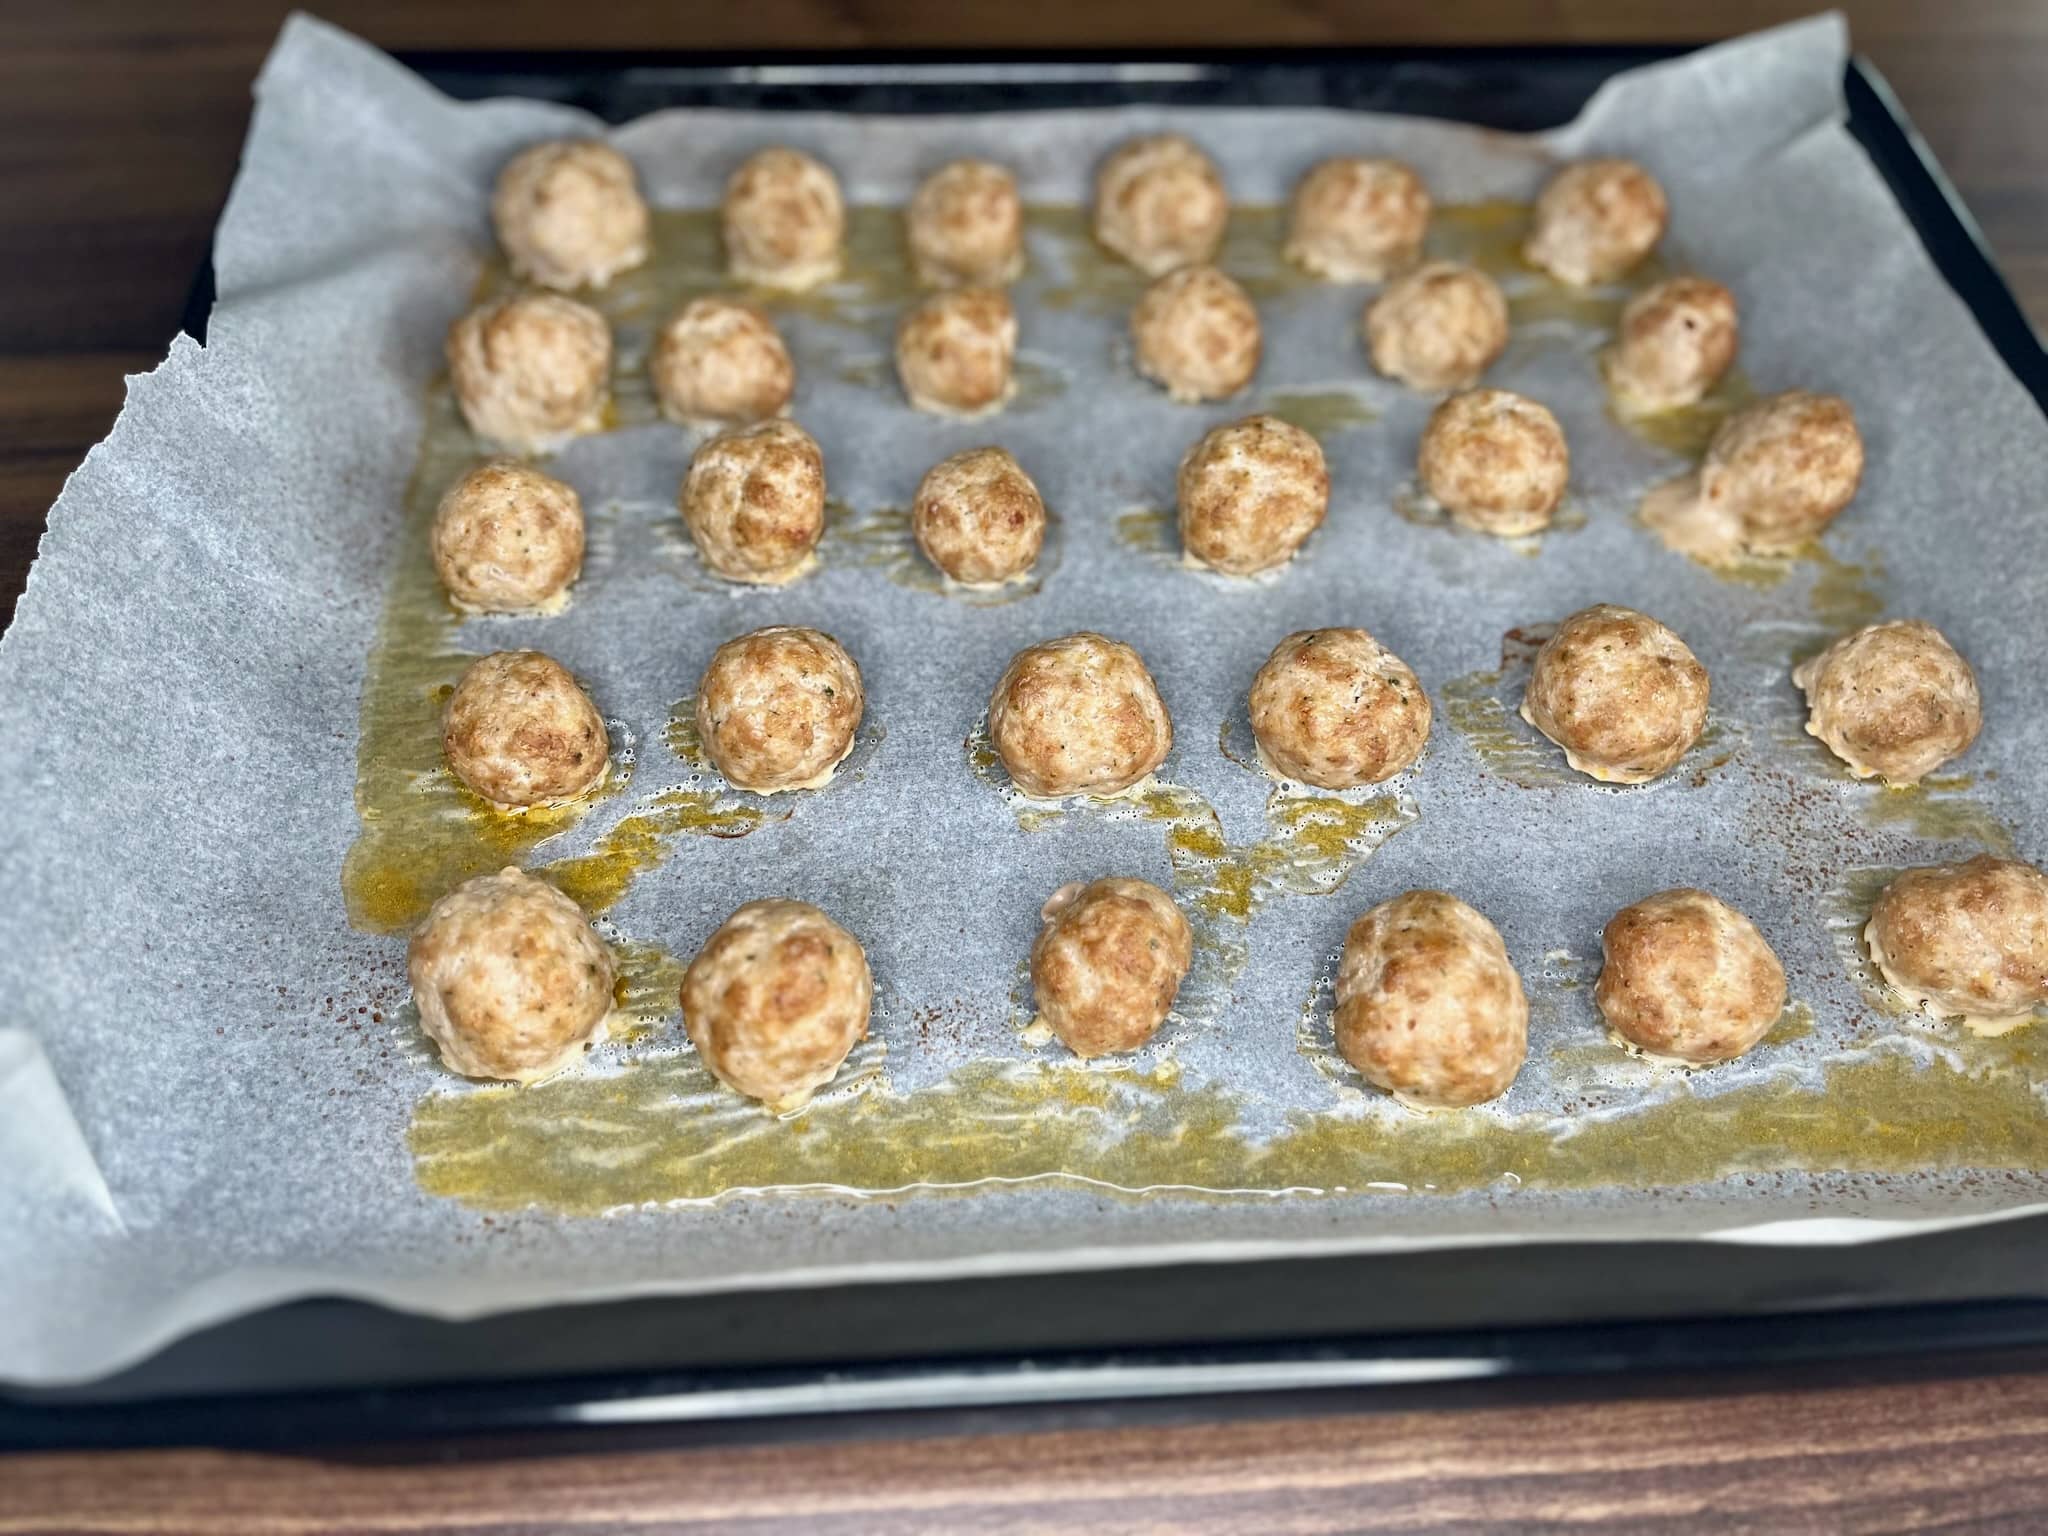 The nicely browned meatballs are still on the baking tray